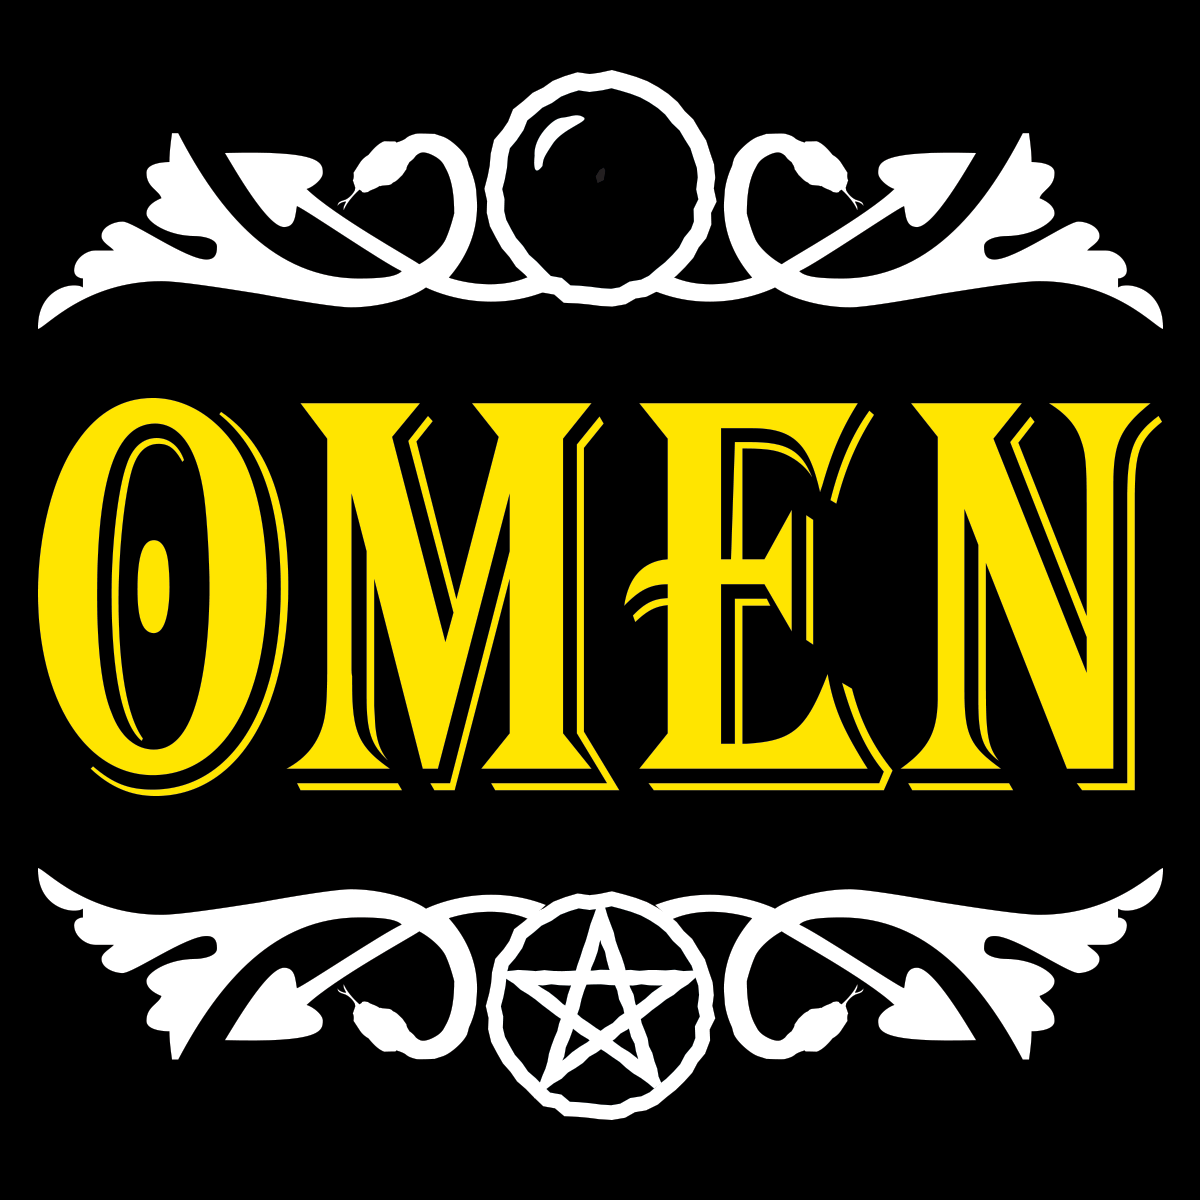 the word omen written in yellow on a black background.